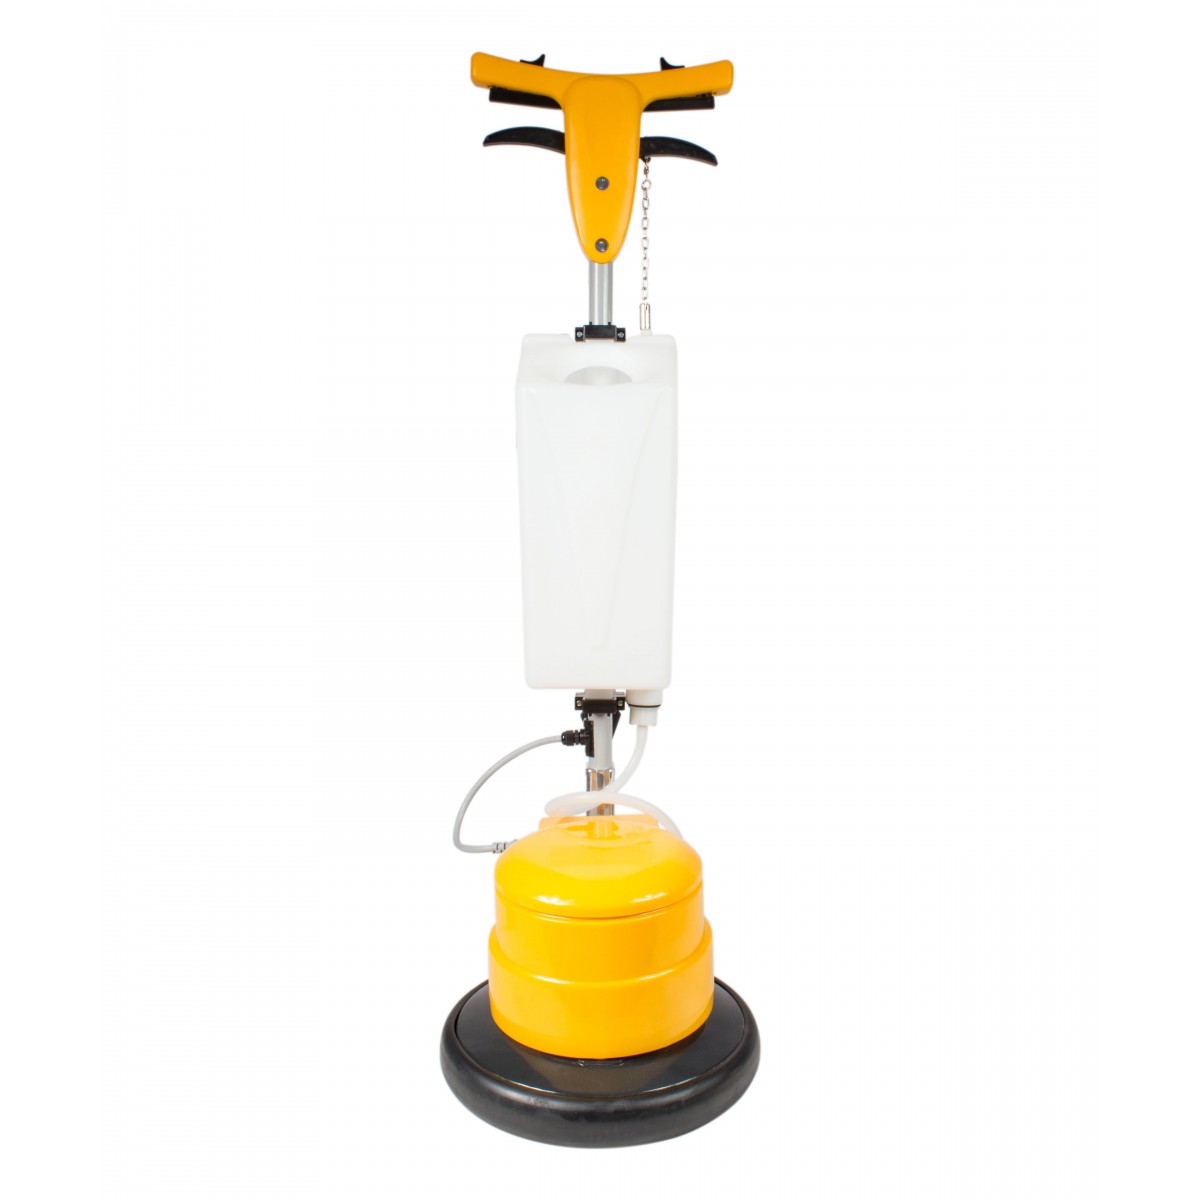 Confined Spaces Floor Machine - Single Brush - 13" Cleaning Path